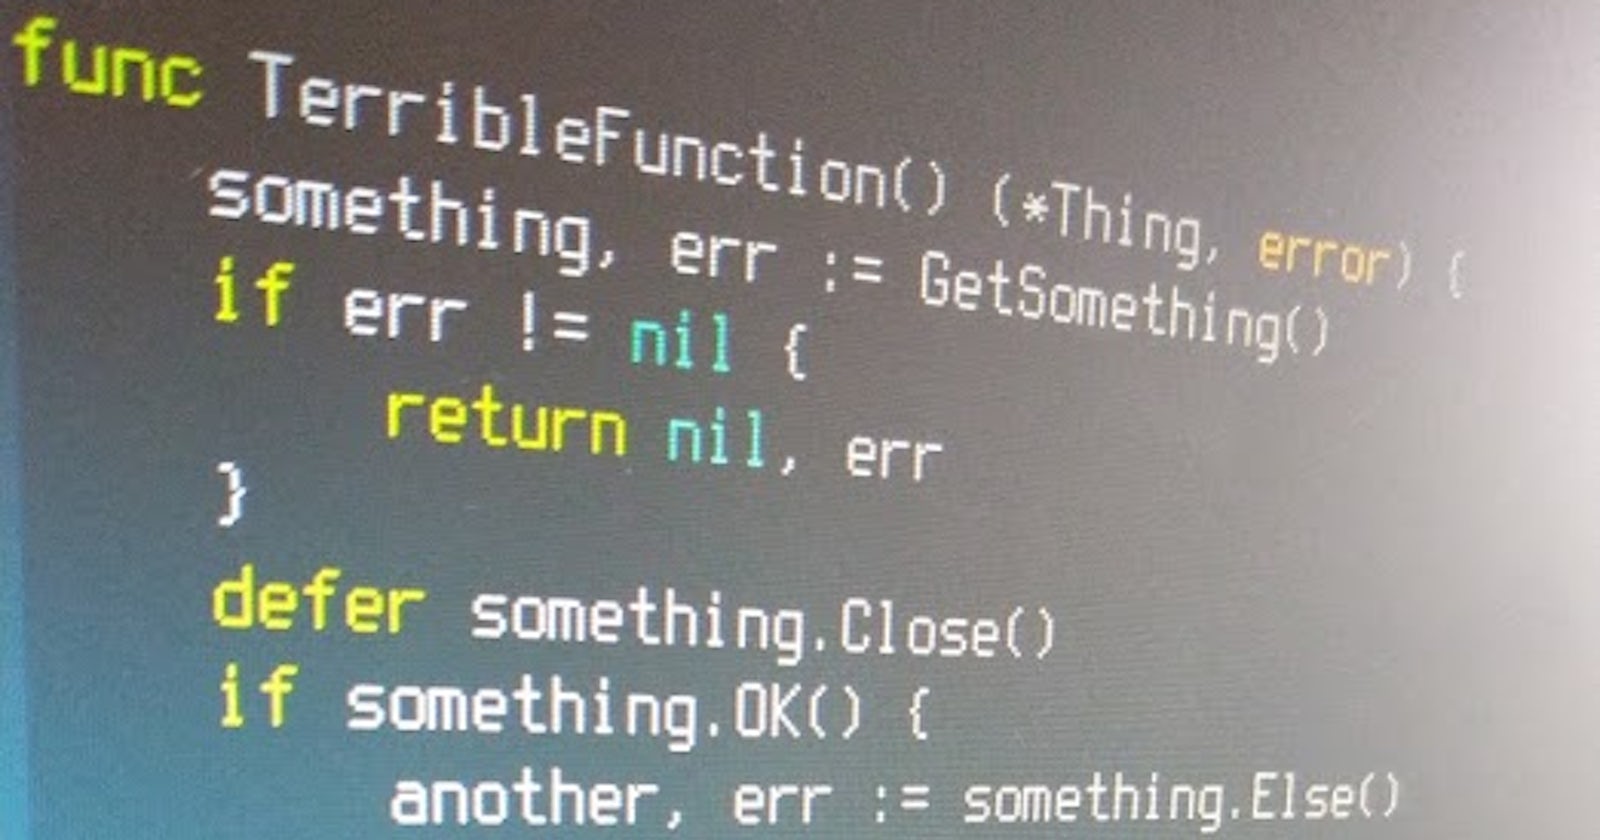 Write better code and be a better programmer by NEVER USING ELSE statements